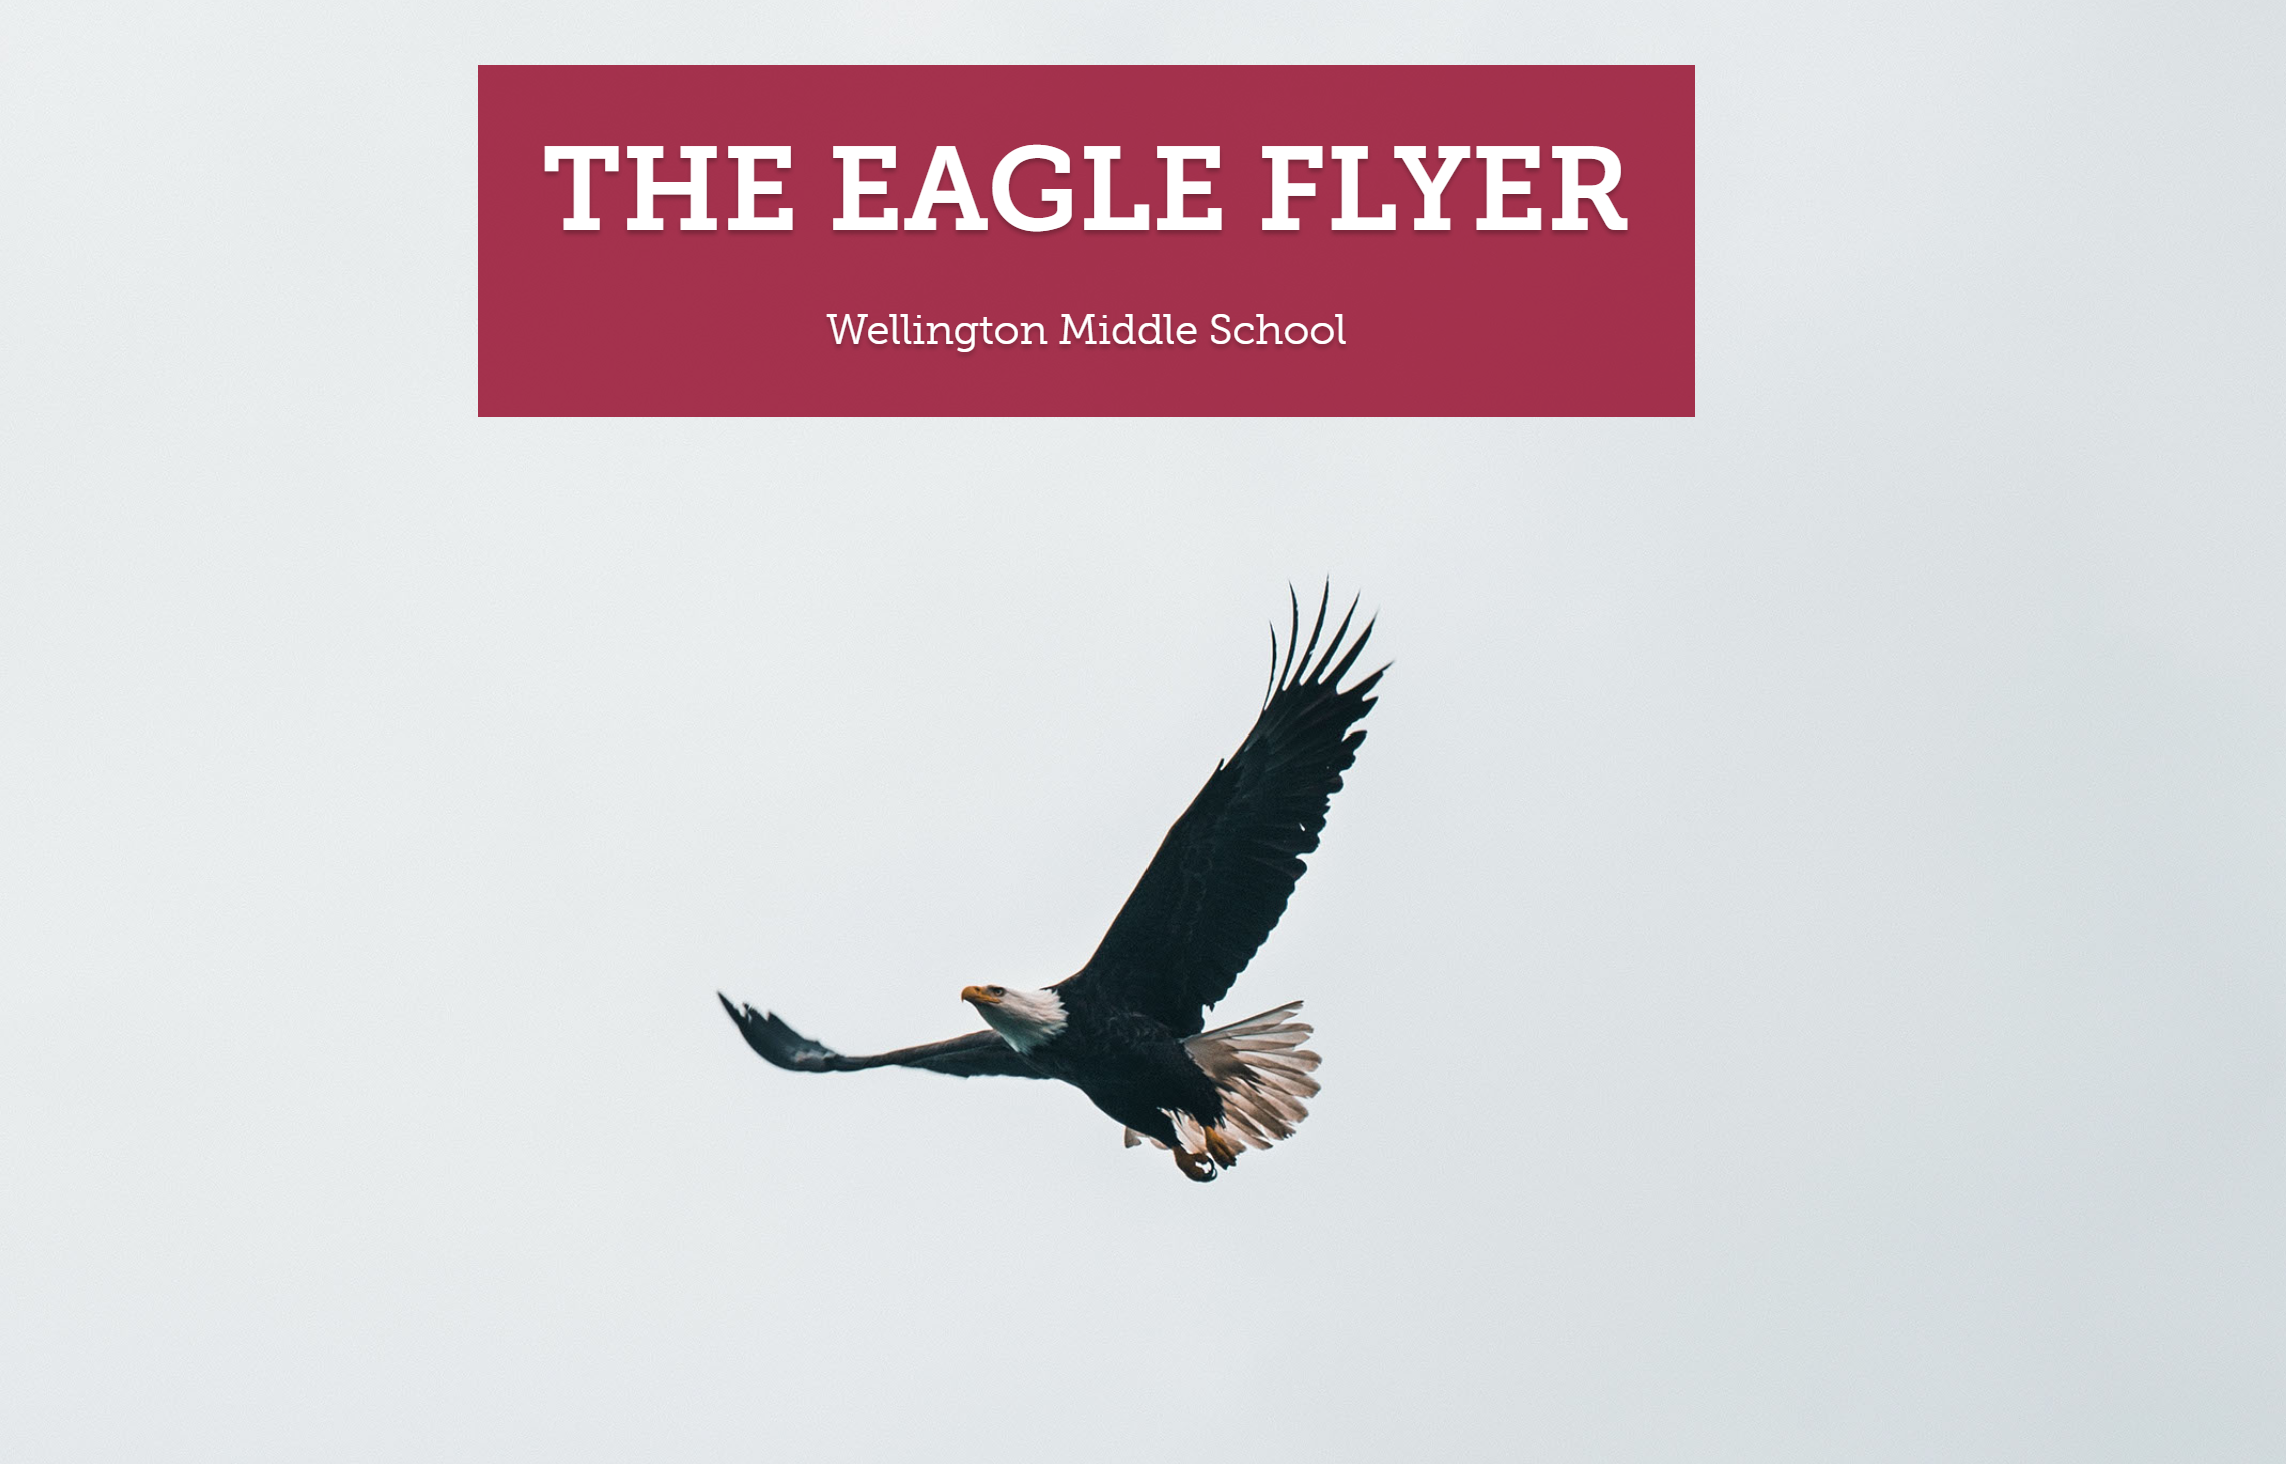 The Eagle Flyer